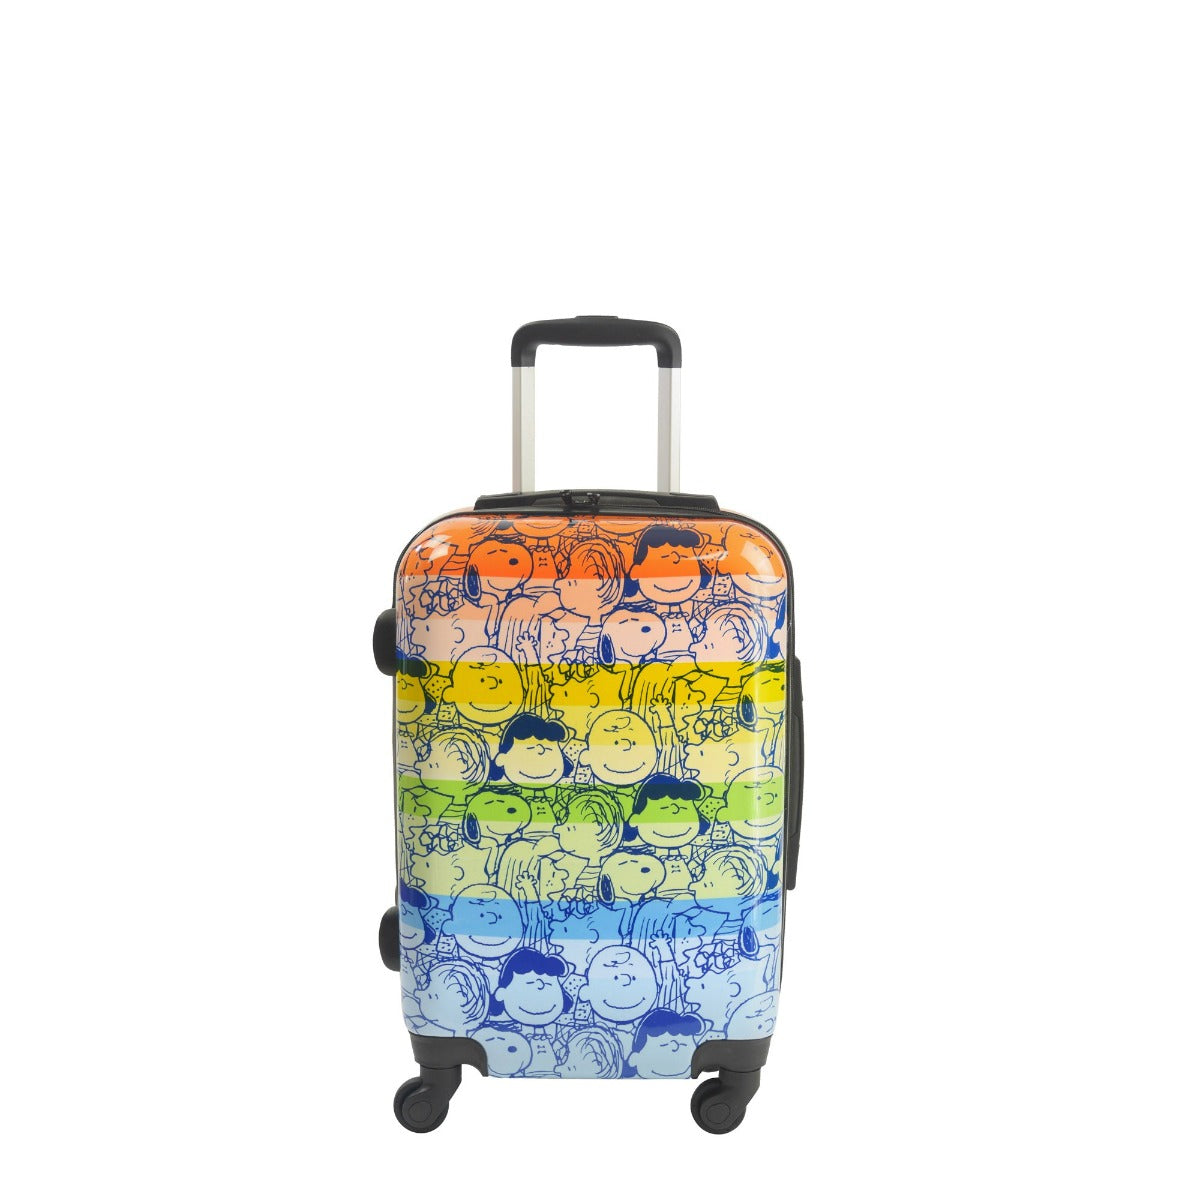 Peanuts rainbow 21" carry on luggage hardside spinner suitcase - best suitcases for travel